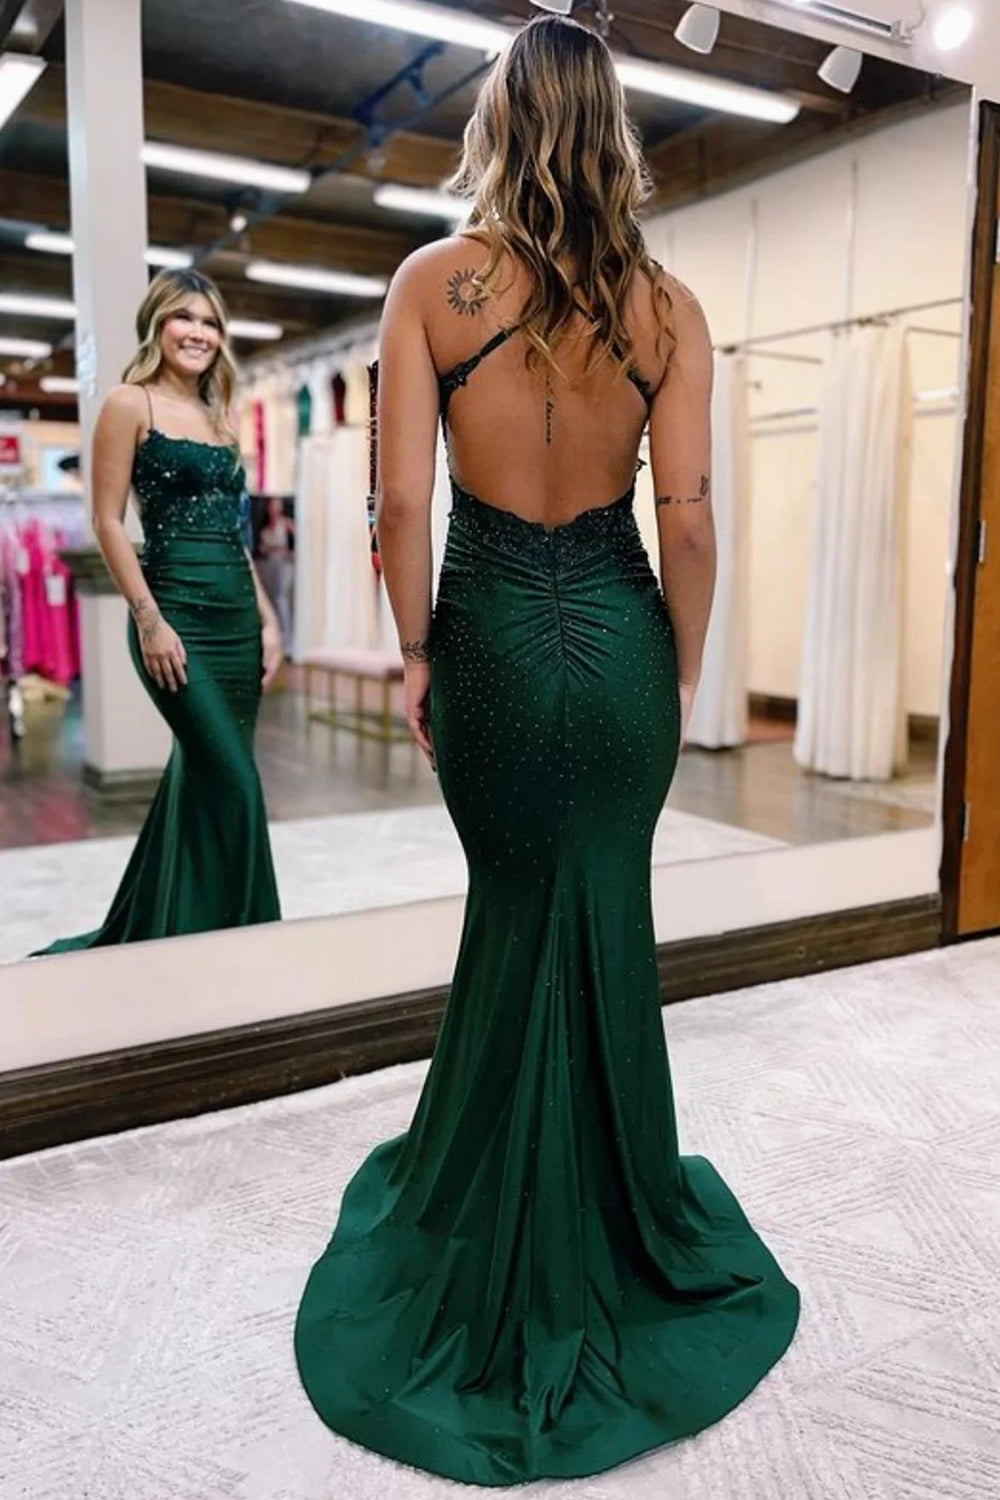 Sexy Spaghetti Straps Trumpet/Mermaid Backless Dark Green Lace Prom Dress/  Formal Dress/ Bridesmaid Dress · FancyGirl · Online Store Powered by  Storenvy